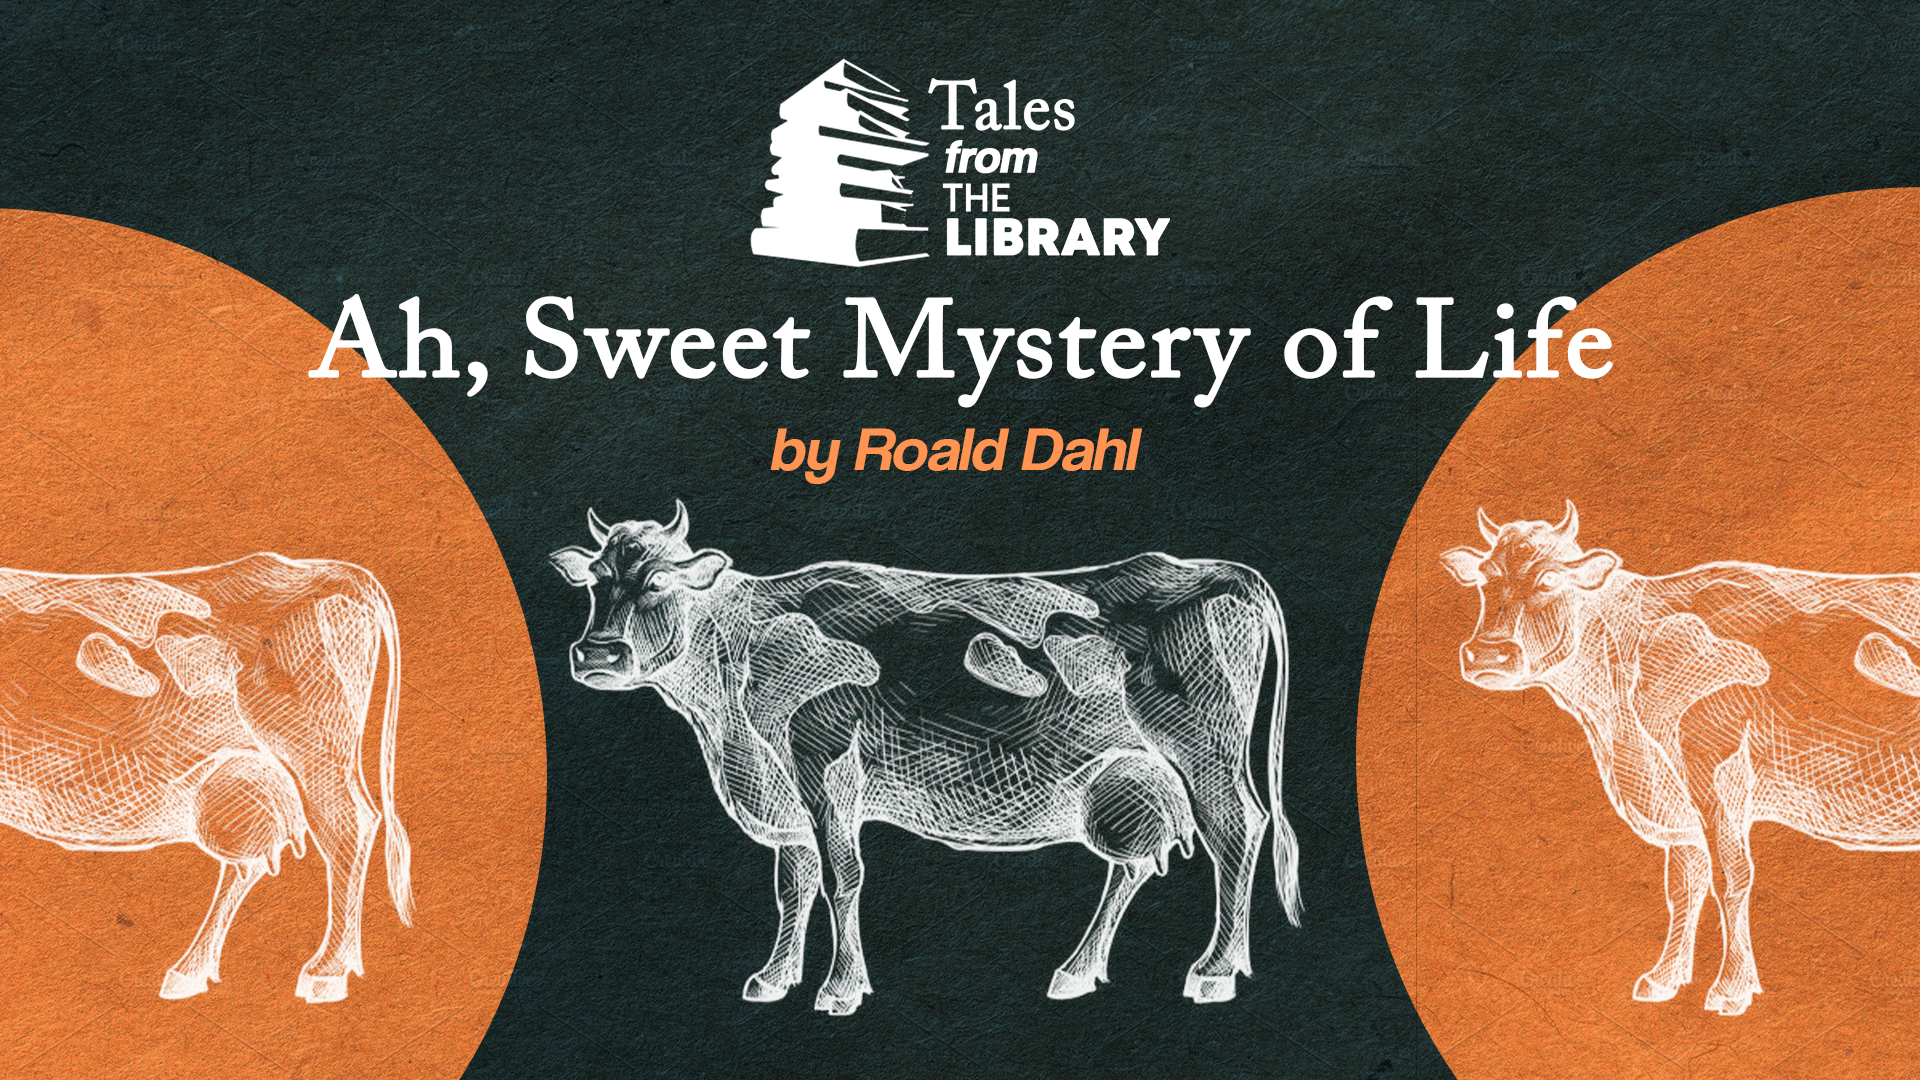 Tales From The Library - Ah, Sweet Mystery of Life